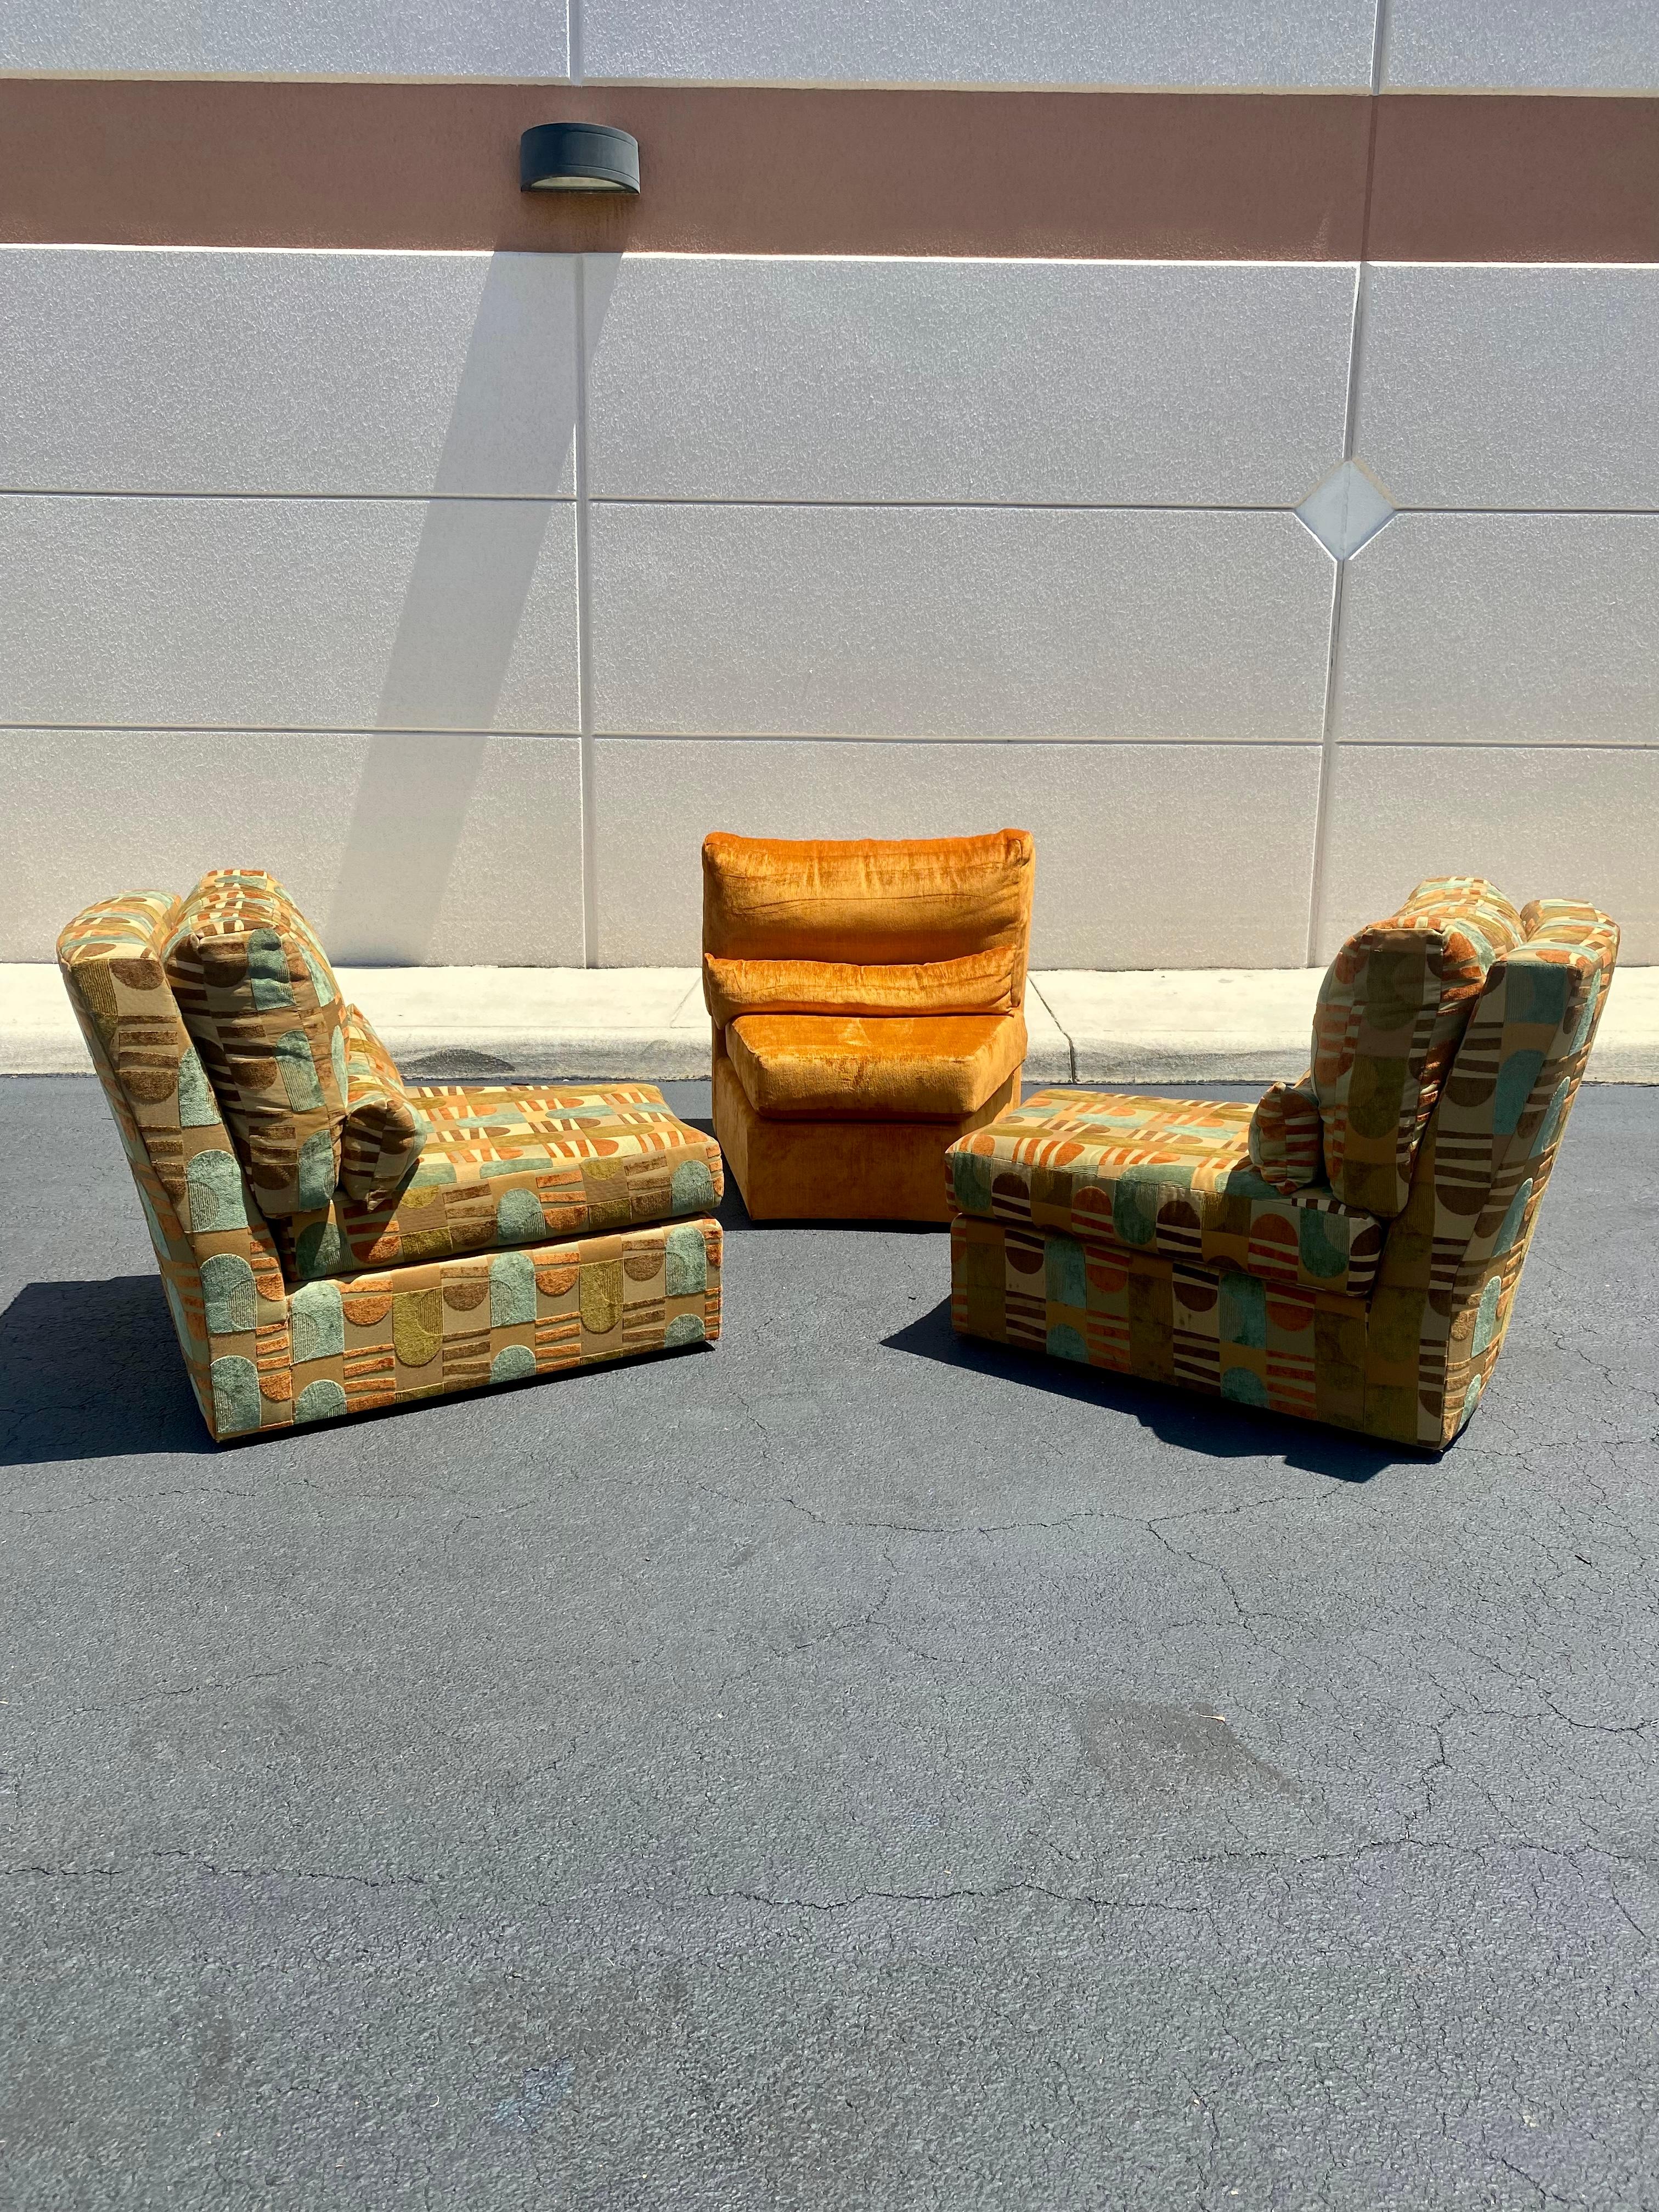 Rare postmodern three pieces curved modular sectional attributed to Milo Baughman for Thayer Coggin. This beautiful colorful sectional is statement piece which is also extremely comfortable and packed with personality! Just look at the gorgeous